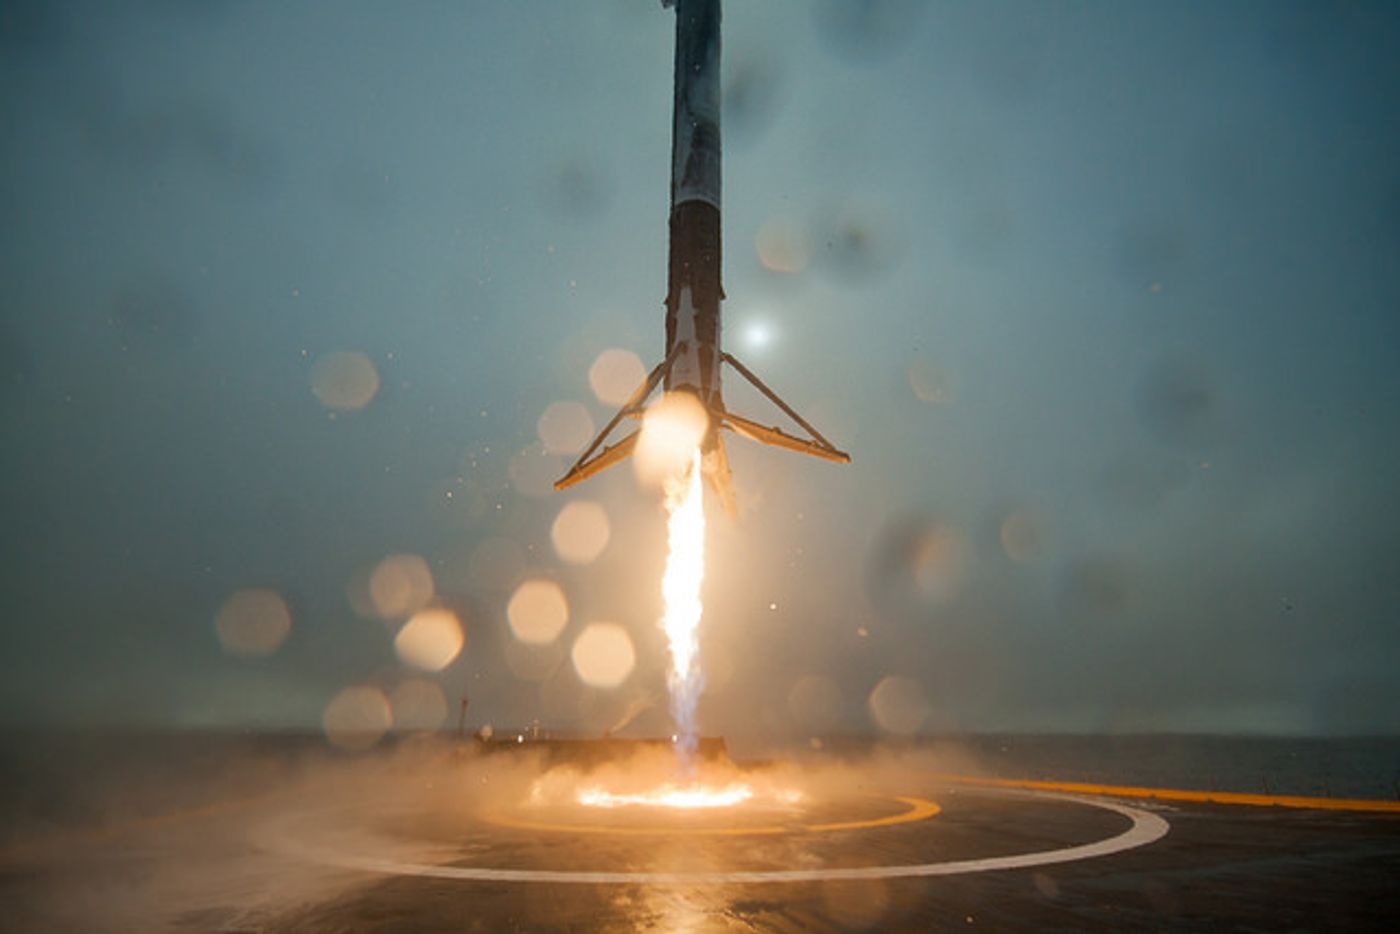 A SpaceX Falcon 9 rocket as it approaches the landing pad.